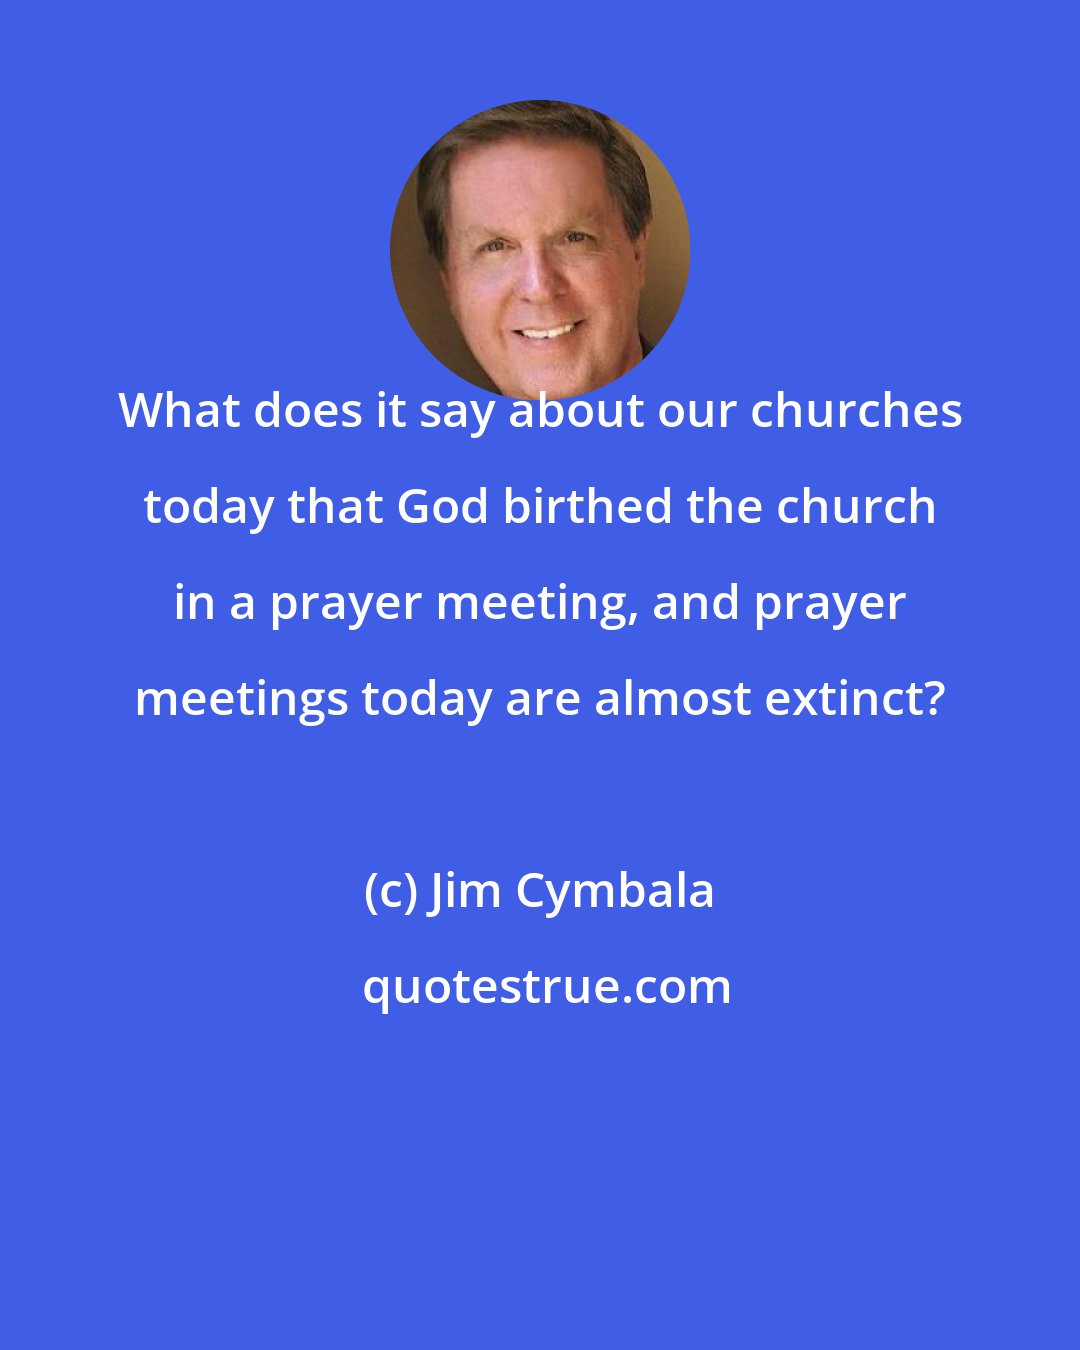 Jim Cymbala: What does it say about our churches today that God birthed the church in a prayer meeting, and prayer meetings today are almost extinct?